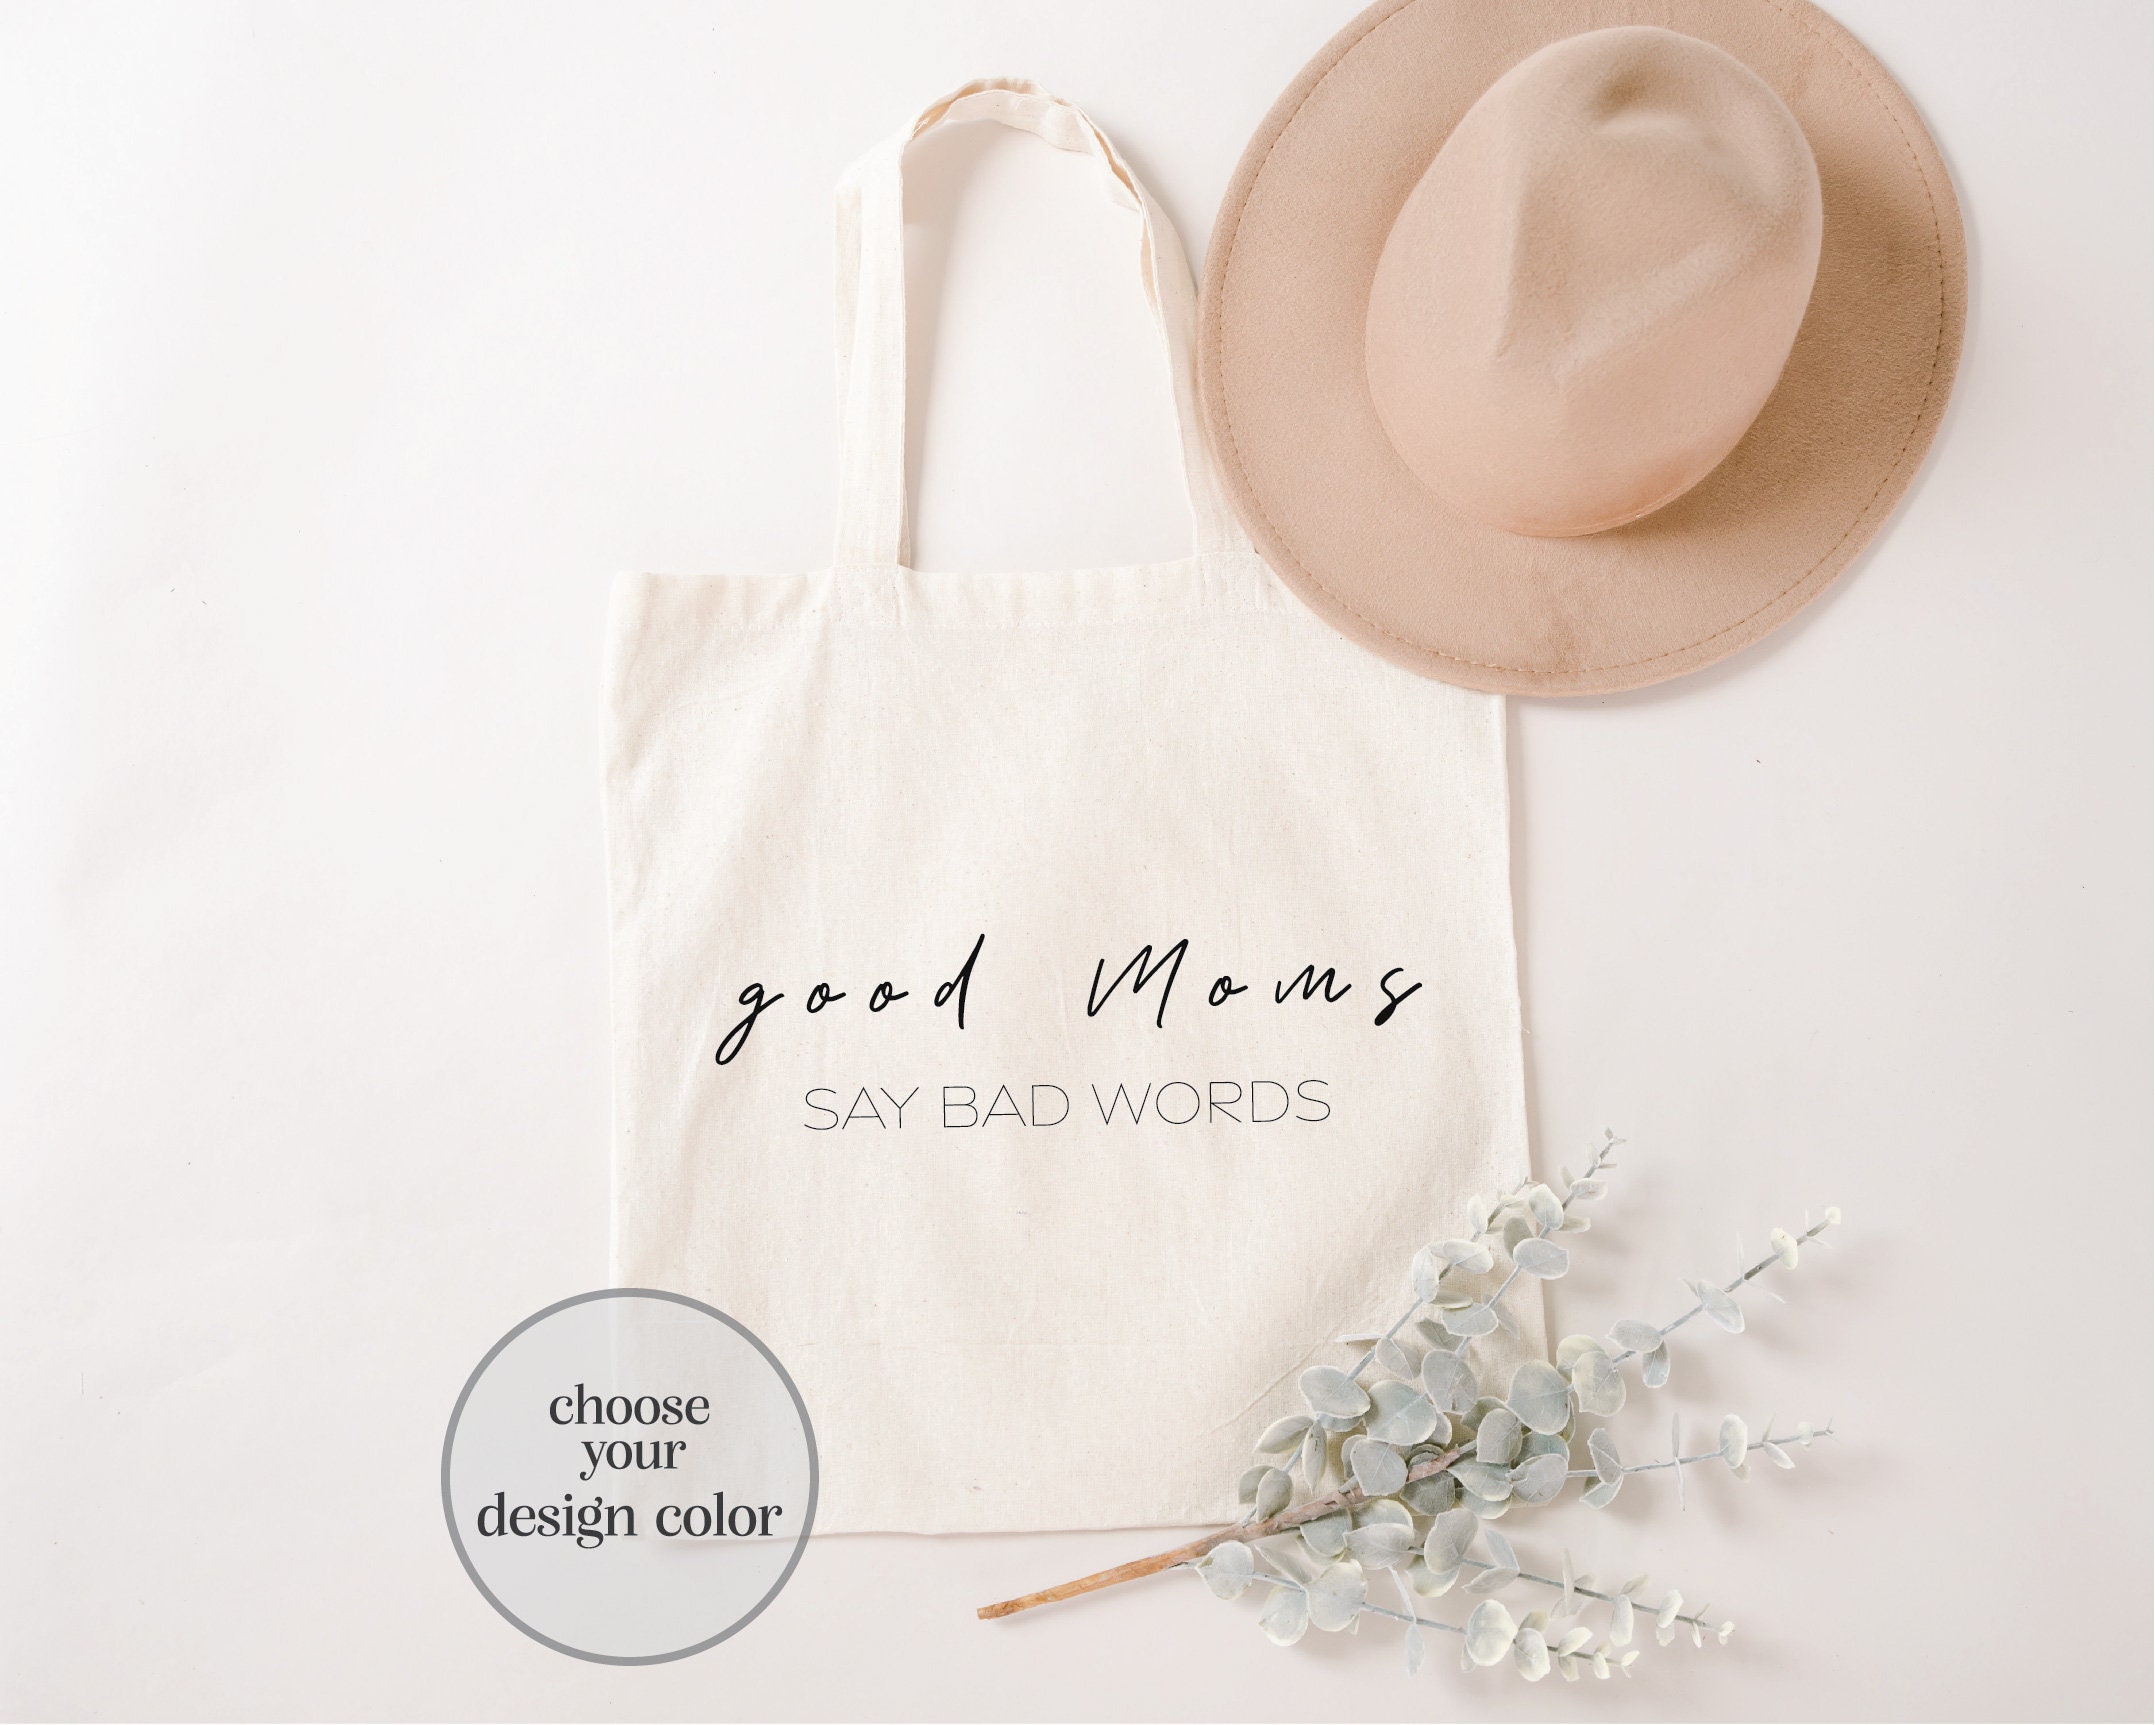 The classic canvas bag – the perfect gift for Mother's Day. And